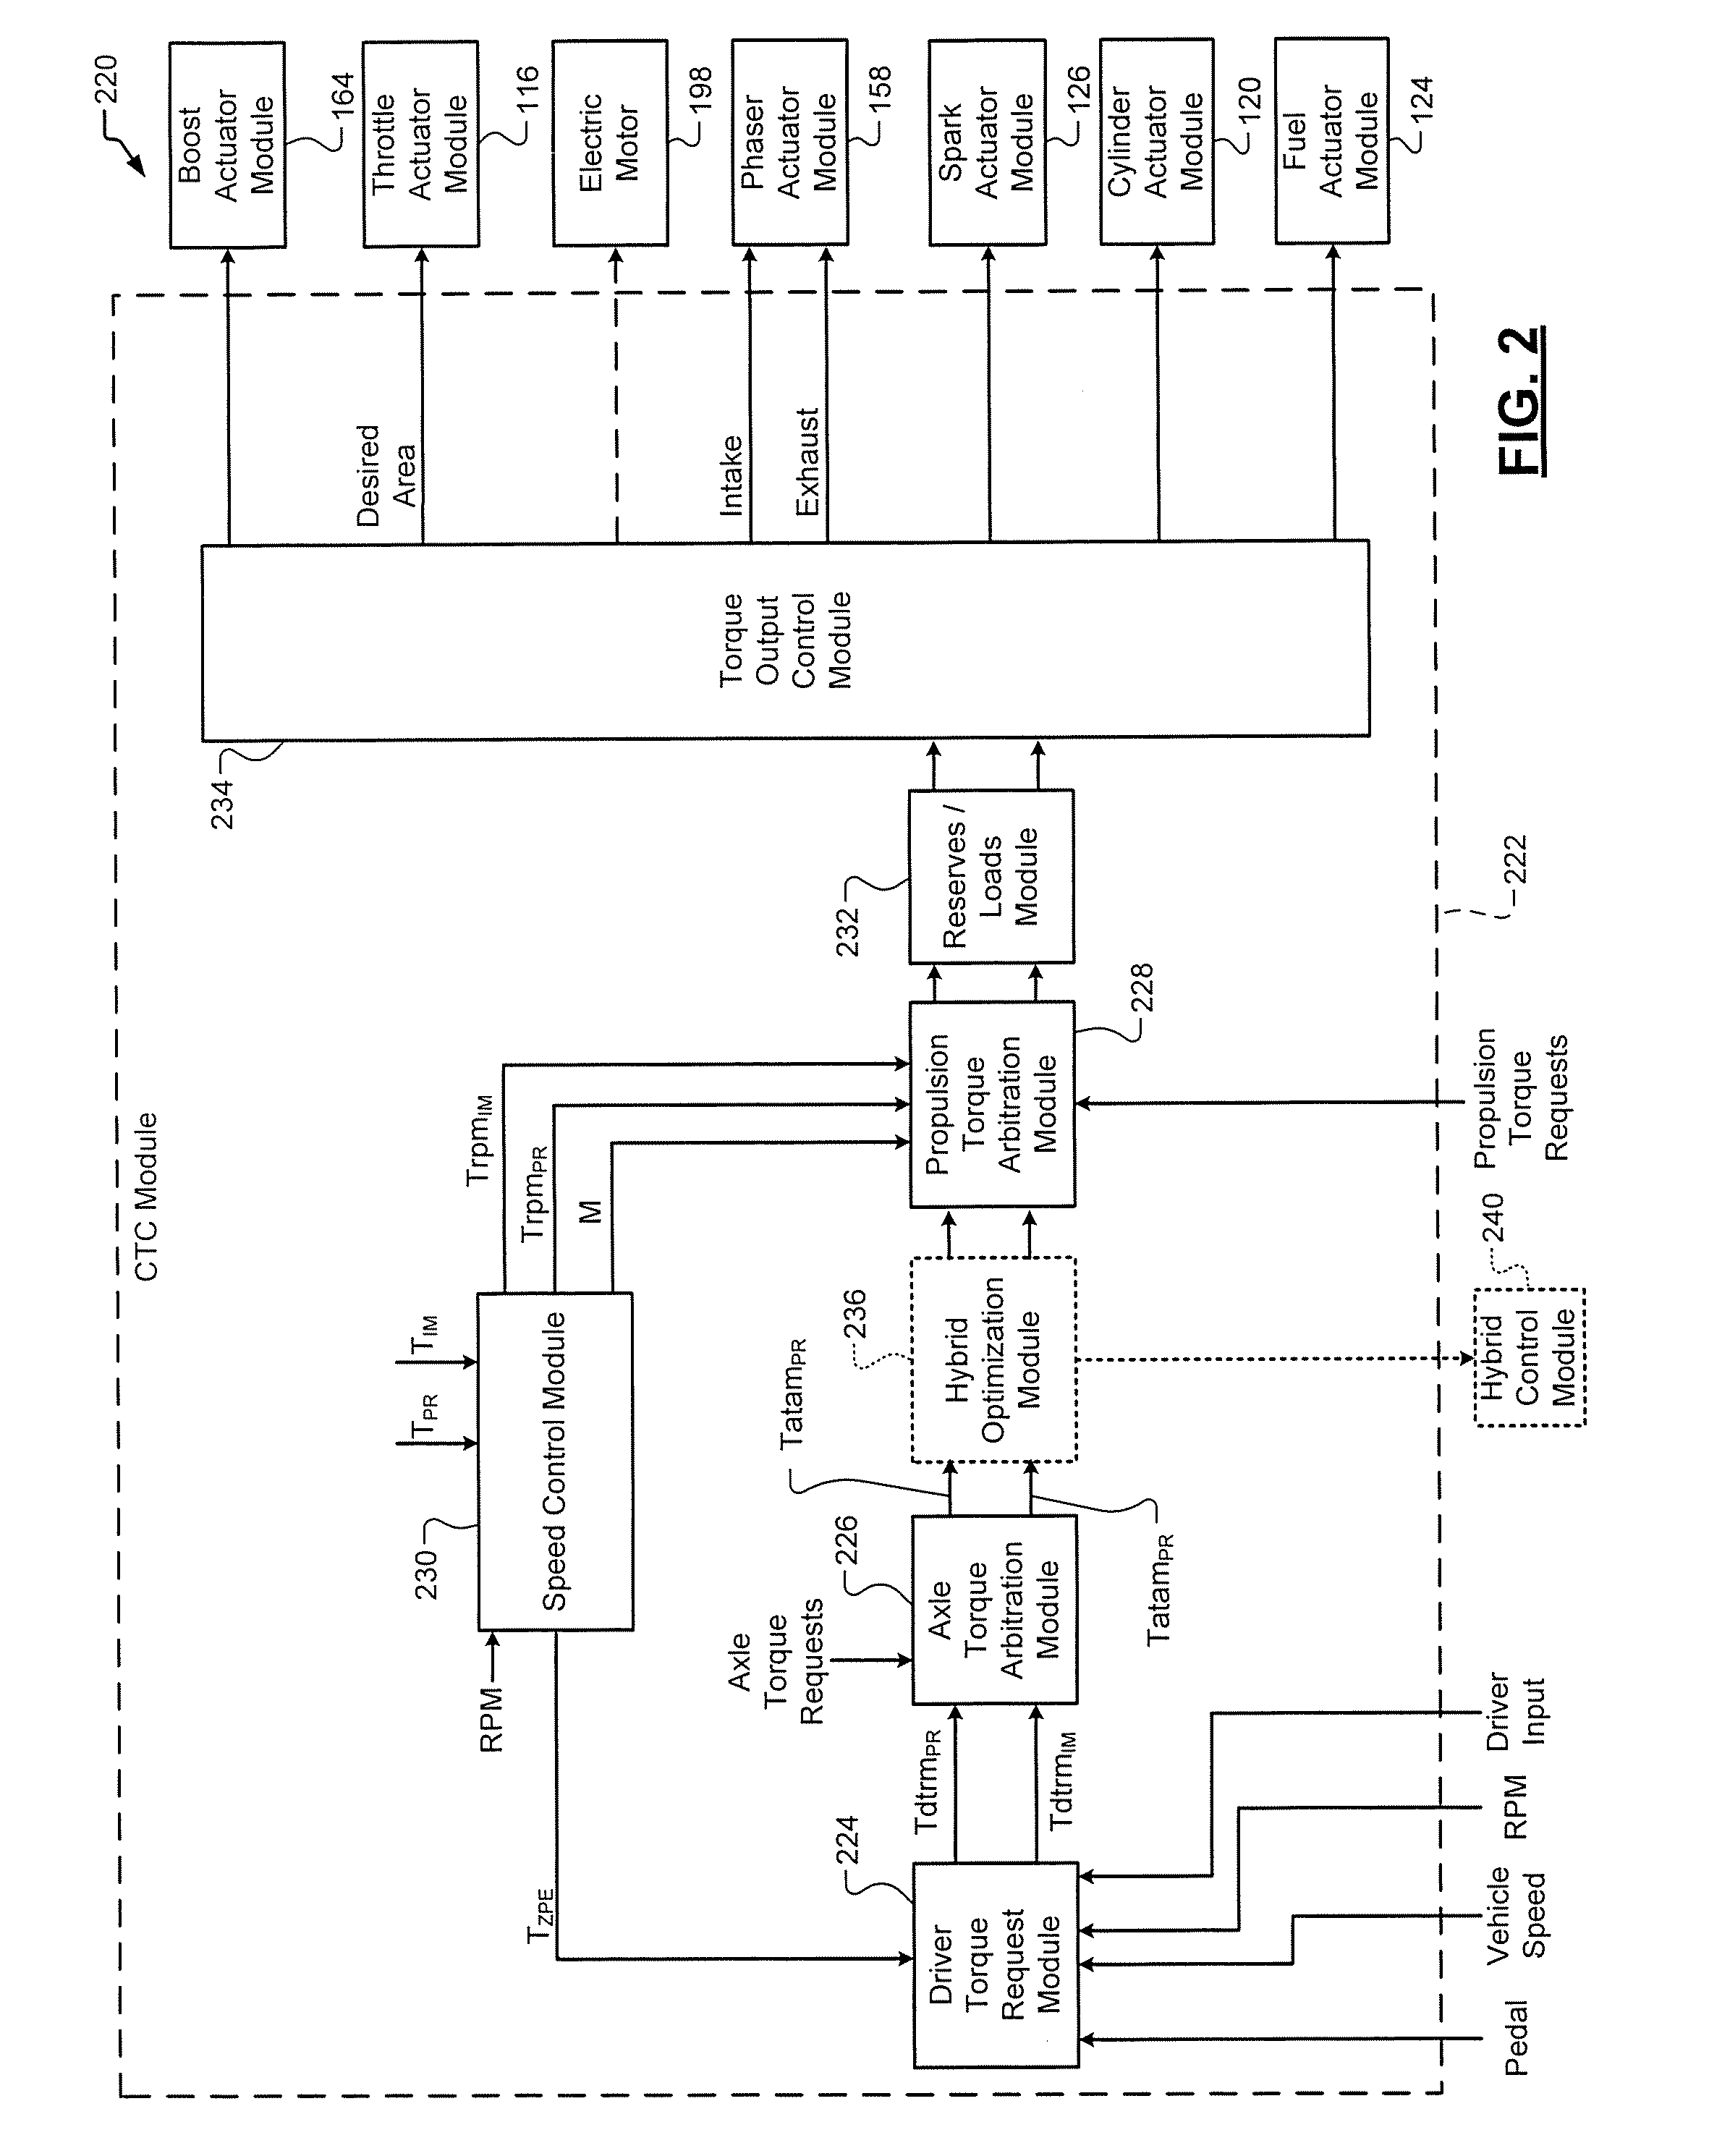 Speed control systems and methods for internal combustion engines